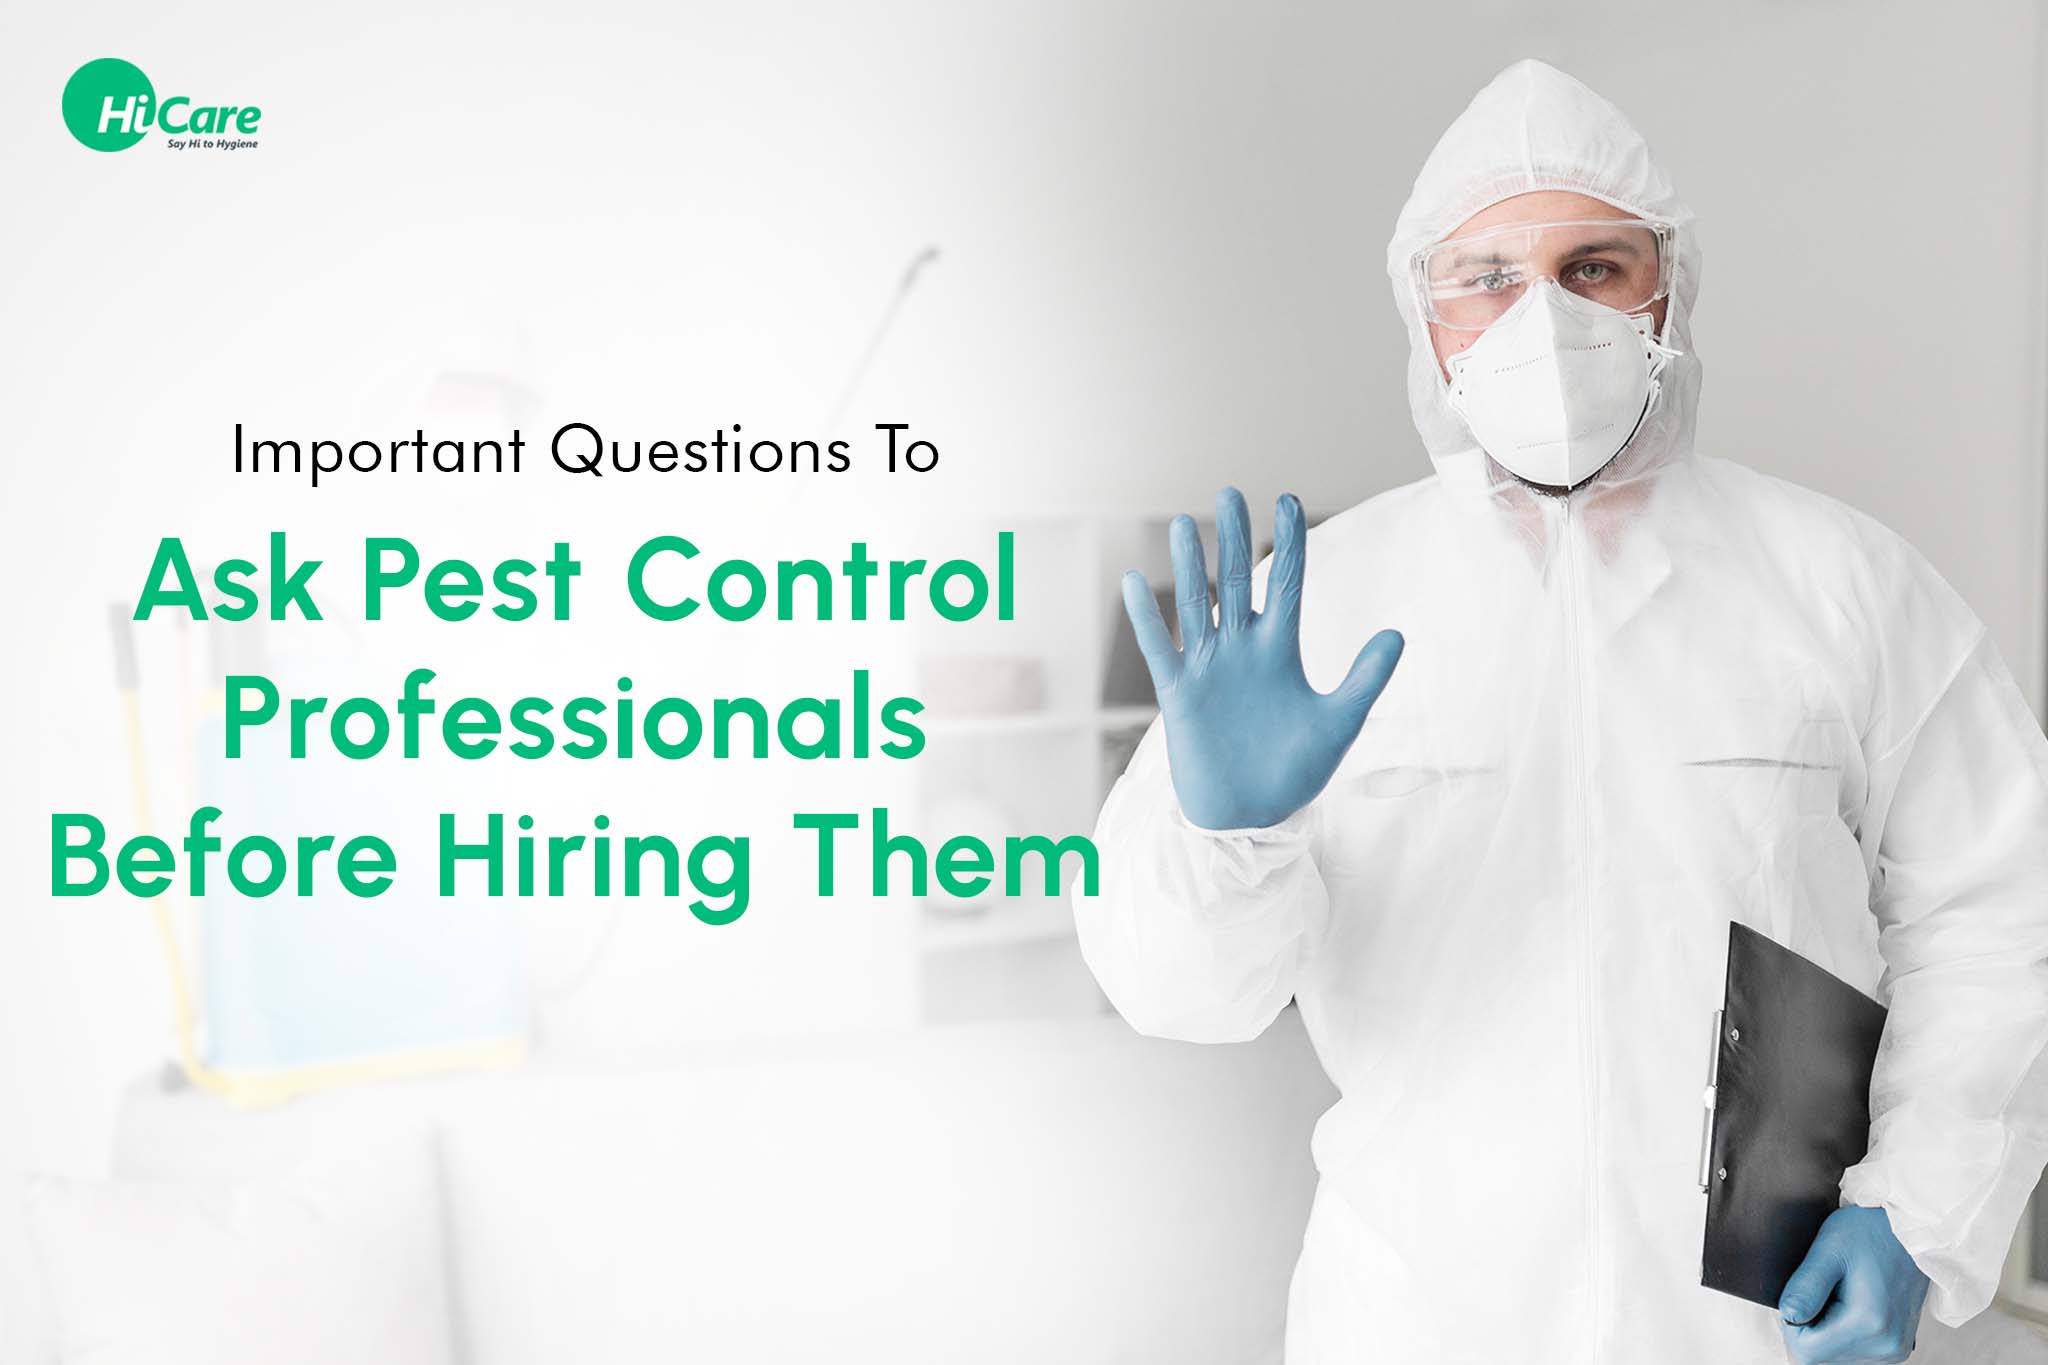 12 Important Questions To Ask Pest Control Professionals Before Hiring Them